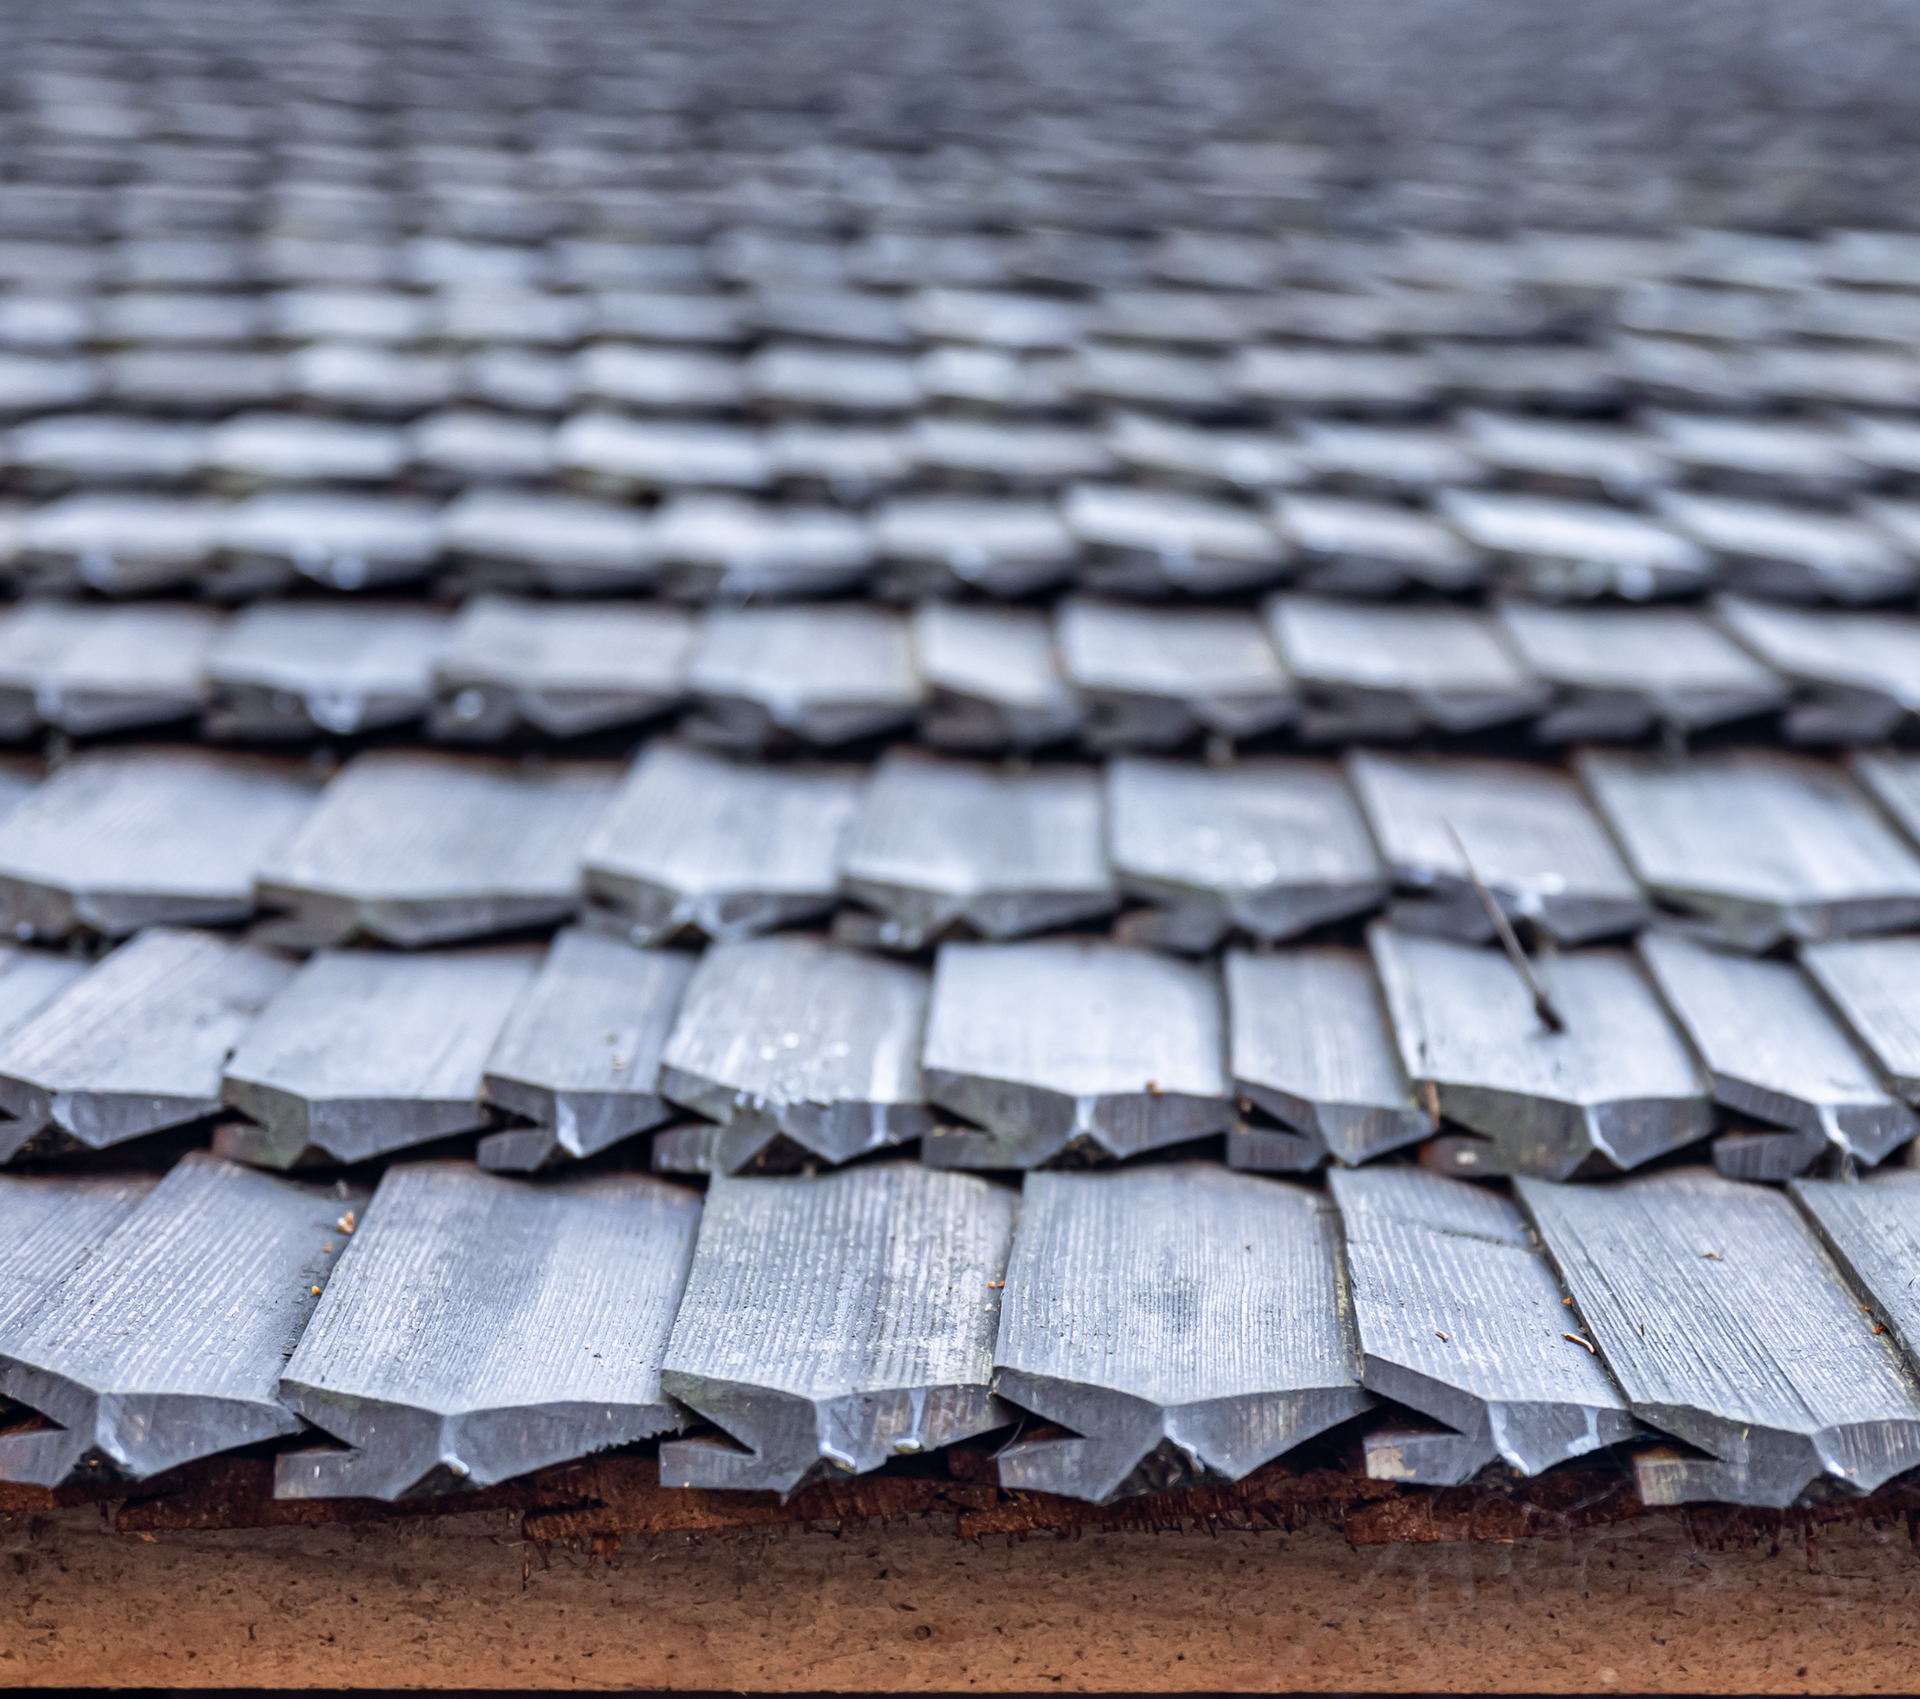 A close up of a wooden roof with shingles.